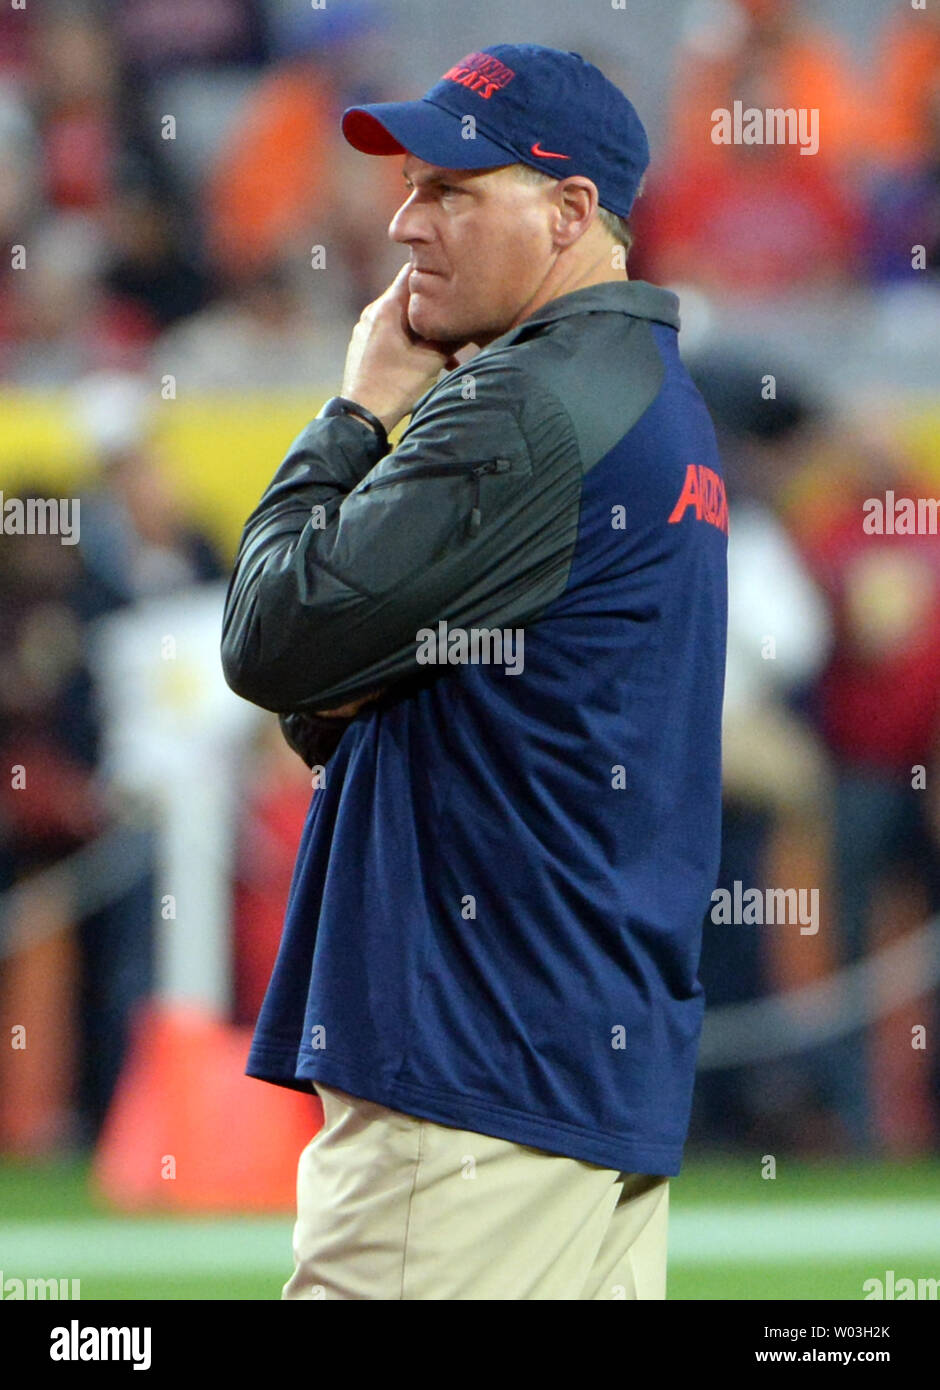 Arizona Wildcats head coach Rich Rodriguez watches the Boise State Broncos warm up before the Fiesta Bowl game at the University of Phoenix Stadium in Glendale,  Arizona December 31, 2014.  UPI/Art Foxall Stock Photo